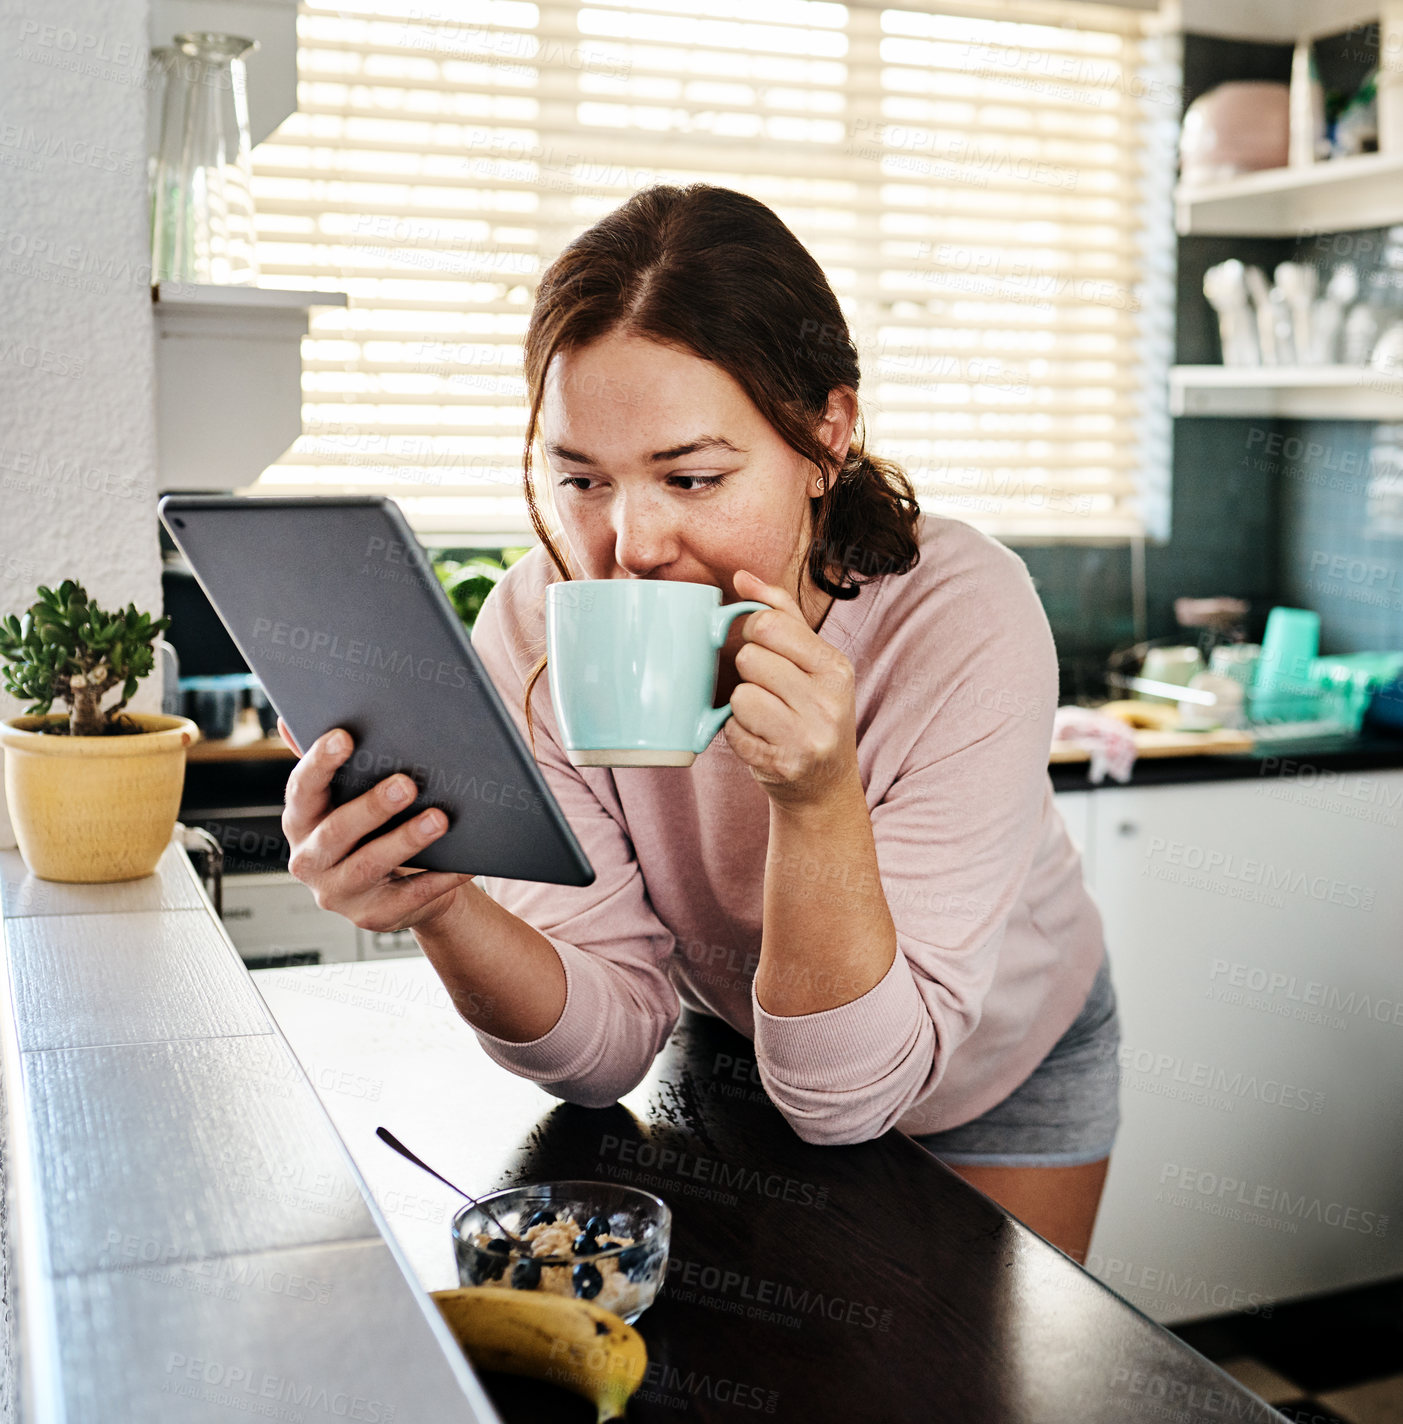 Buy stock photo Shot of a young woman drinking coffee while using a digital tablet